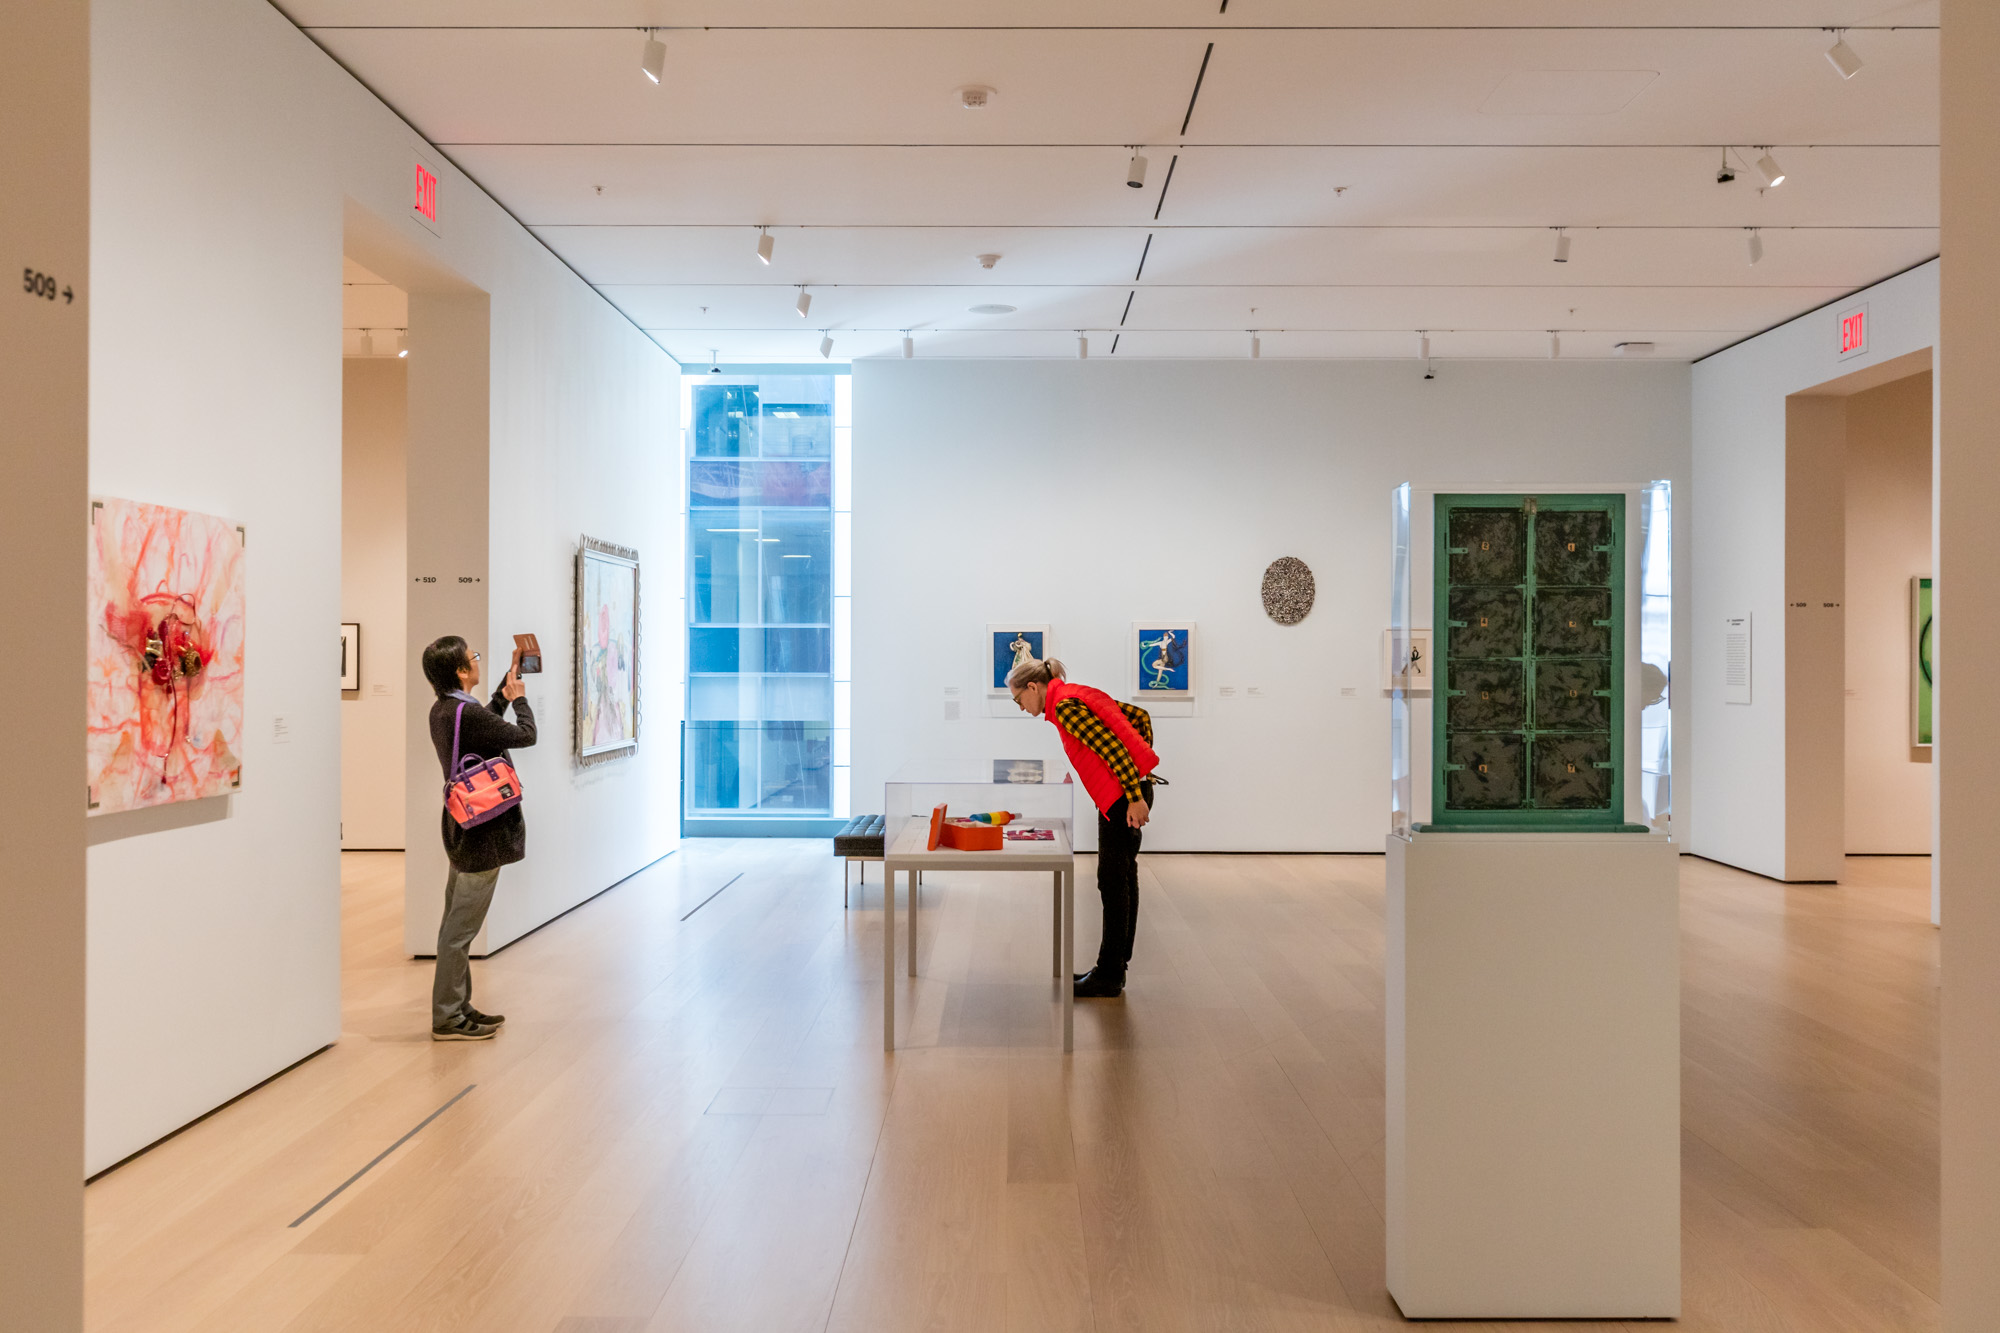 A delightful fifth-floor gallery devoted to the work of painter Florine Stettheimer and like-minded artists.